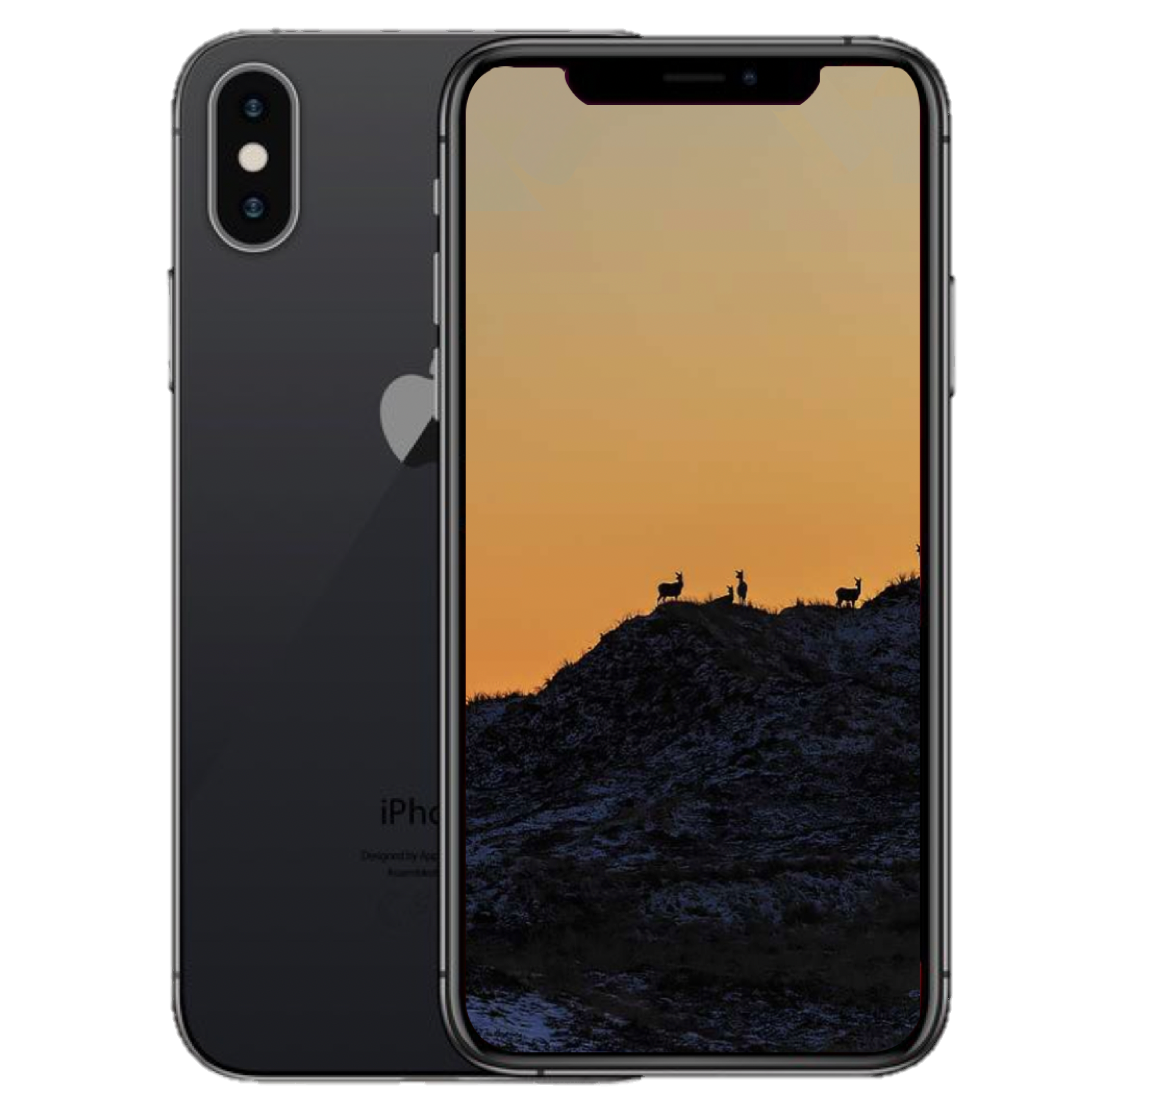 iPhone XS 256GB Space Grey - God stand